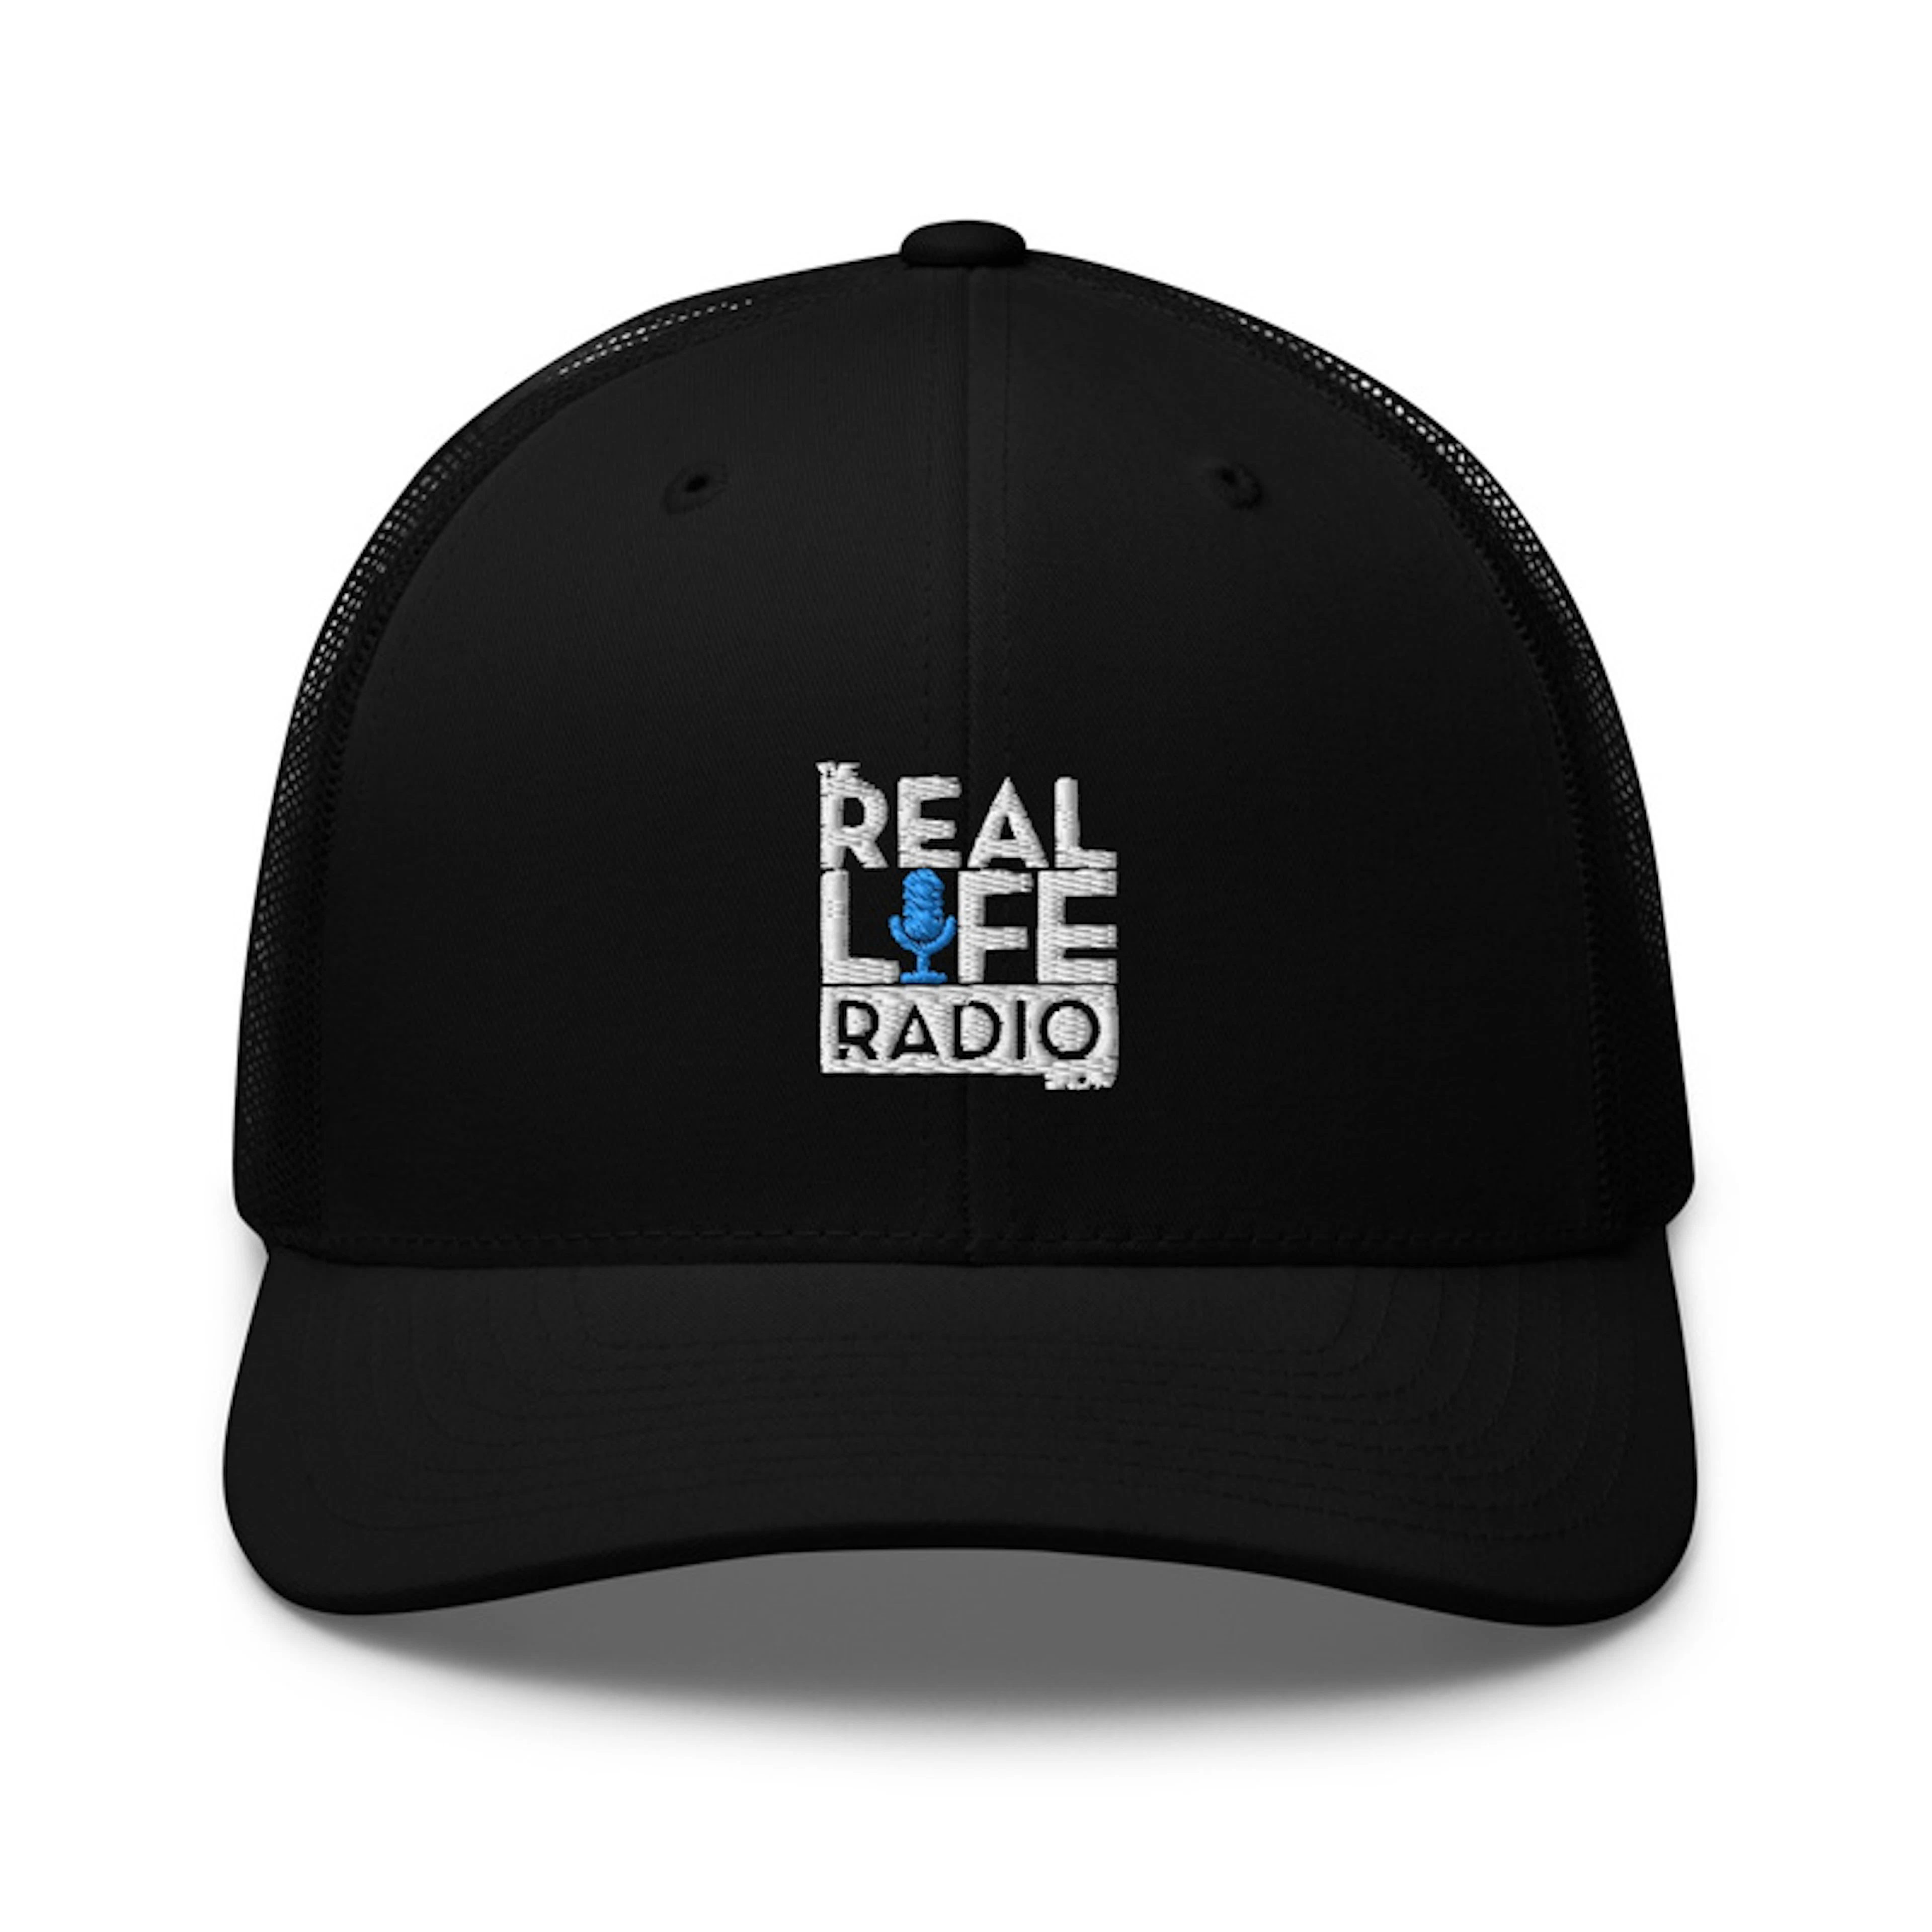 The Official Real Life Radio Hat 